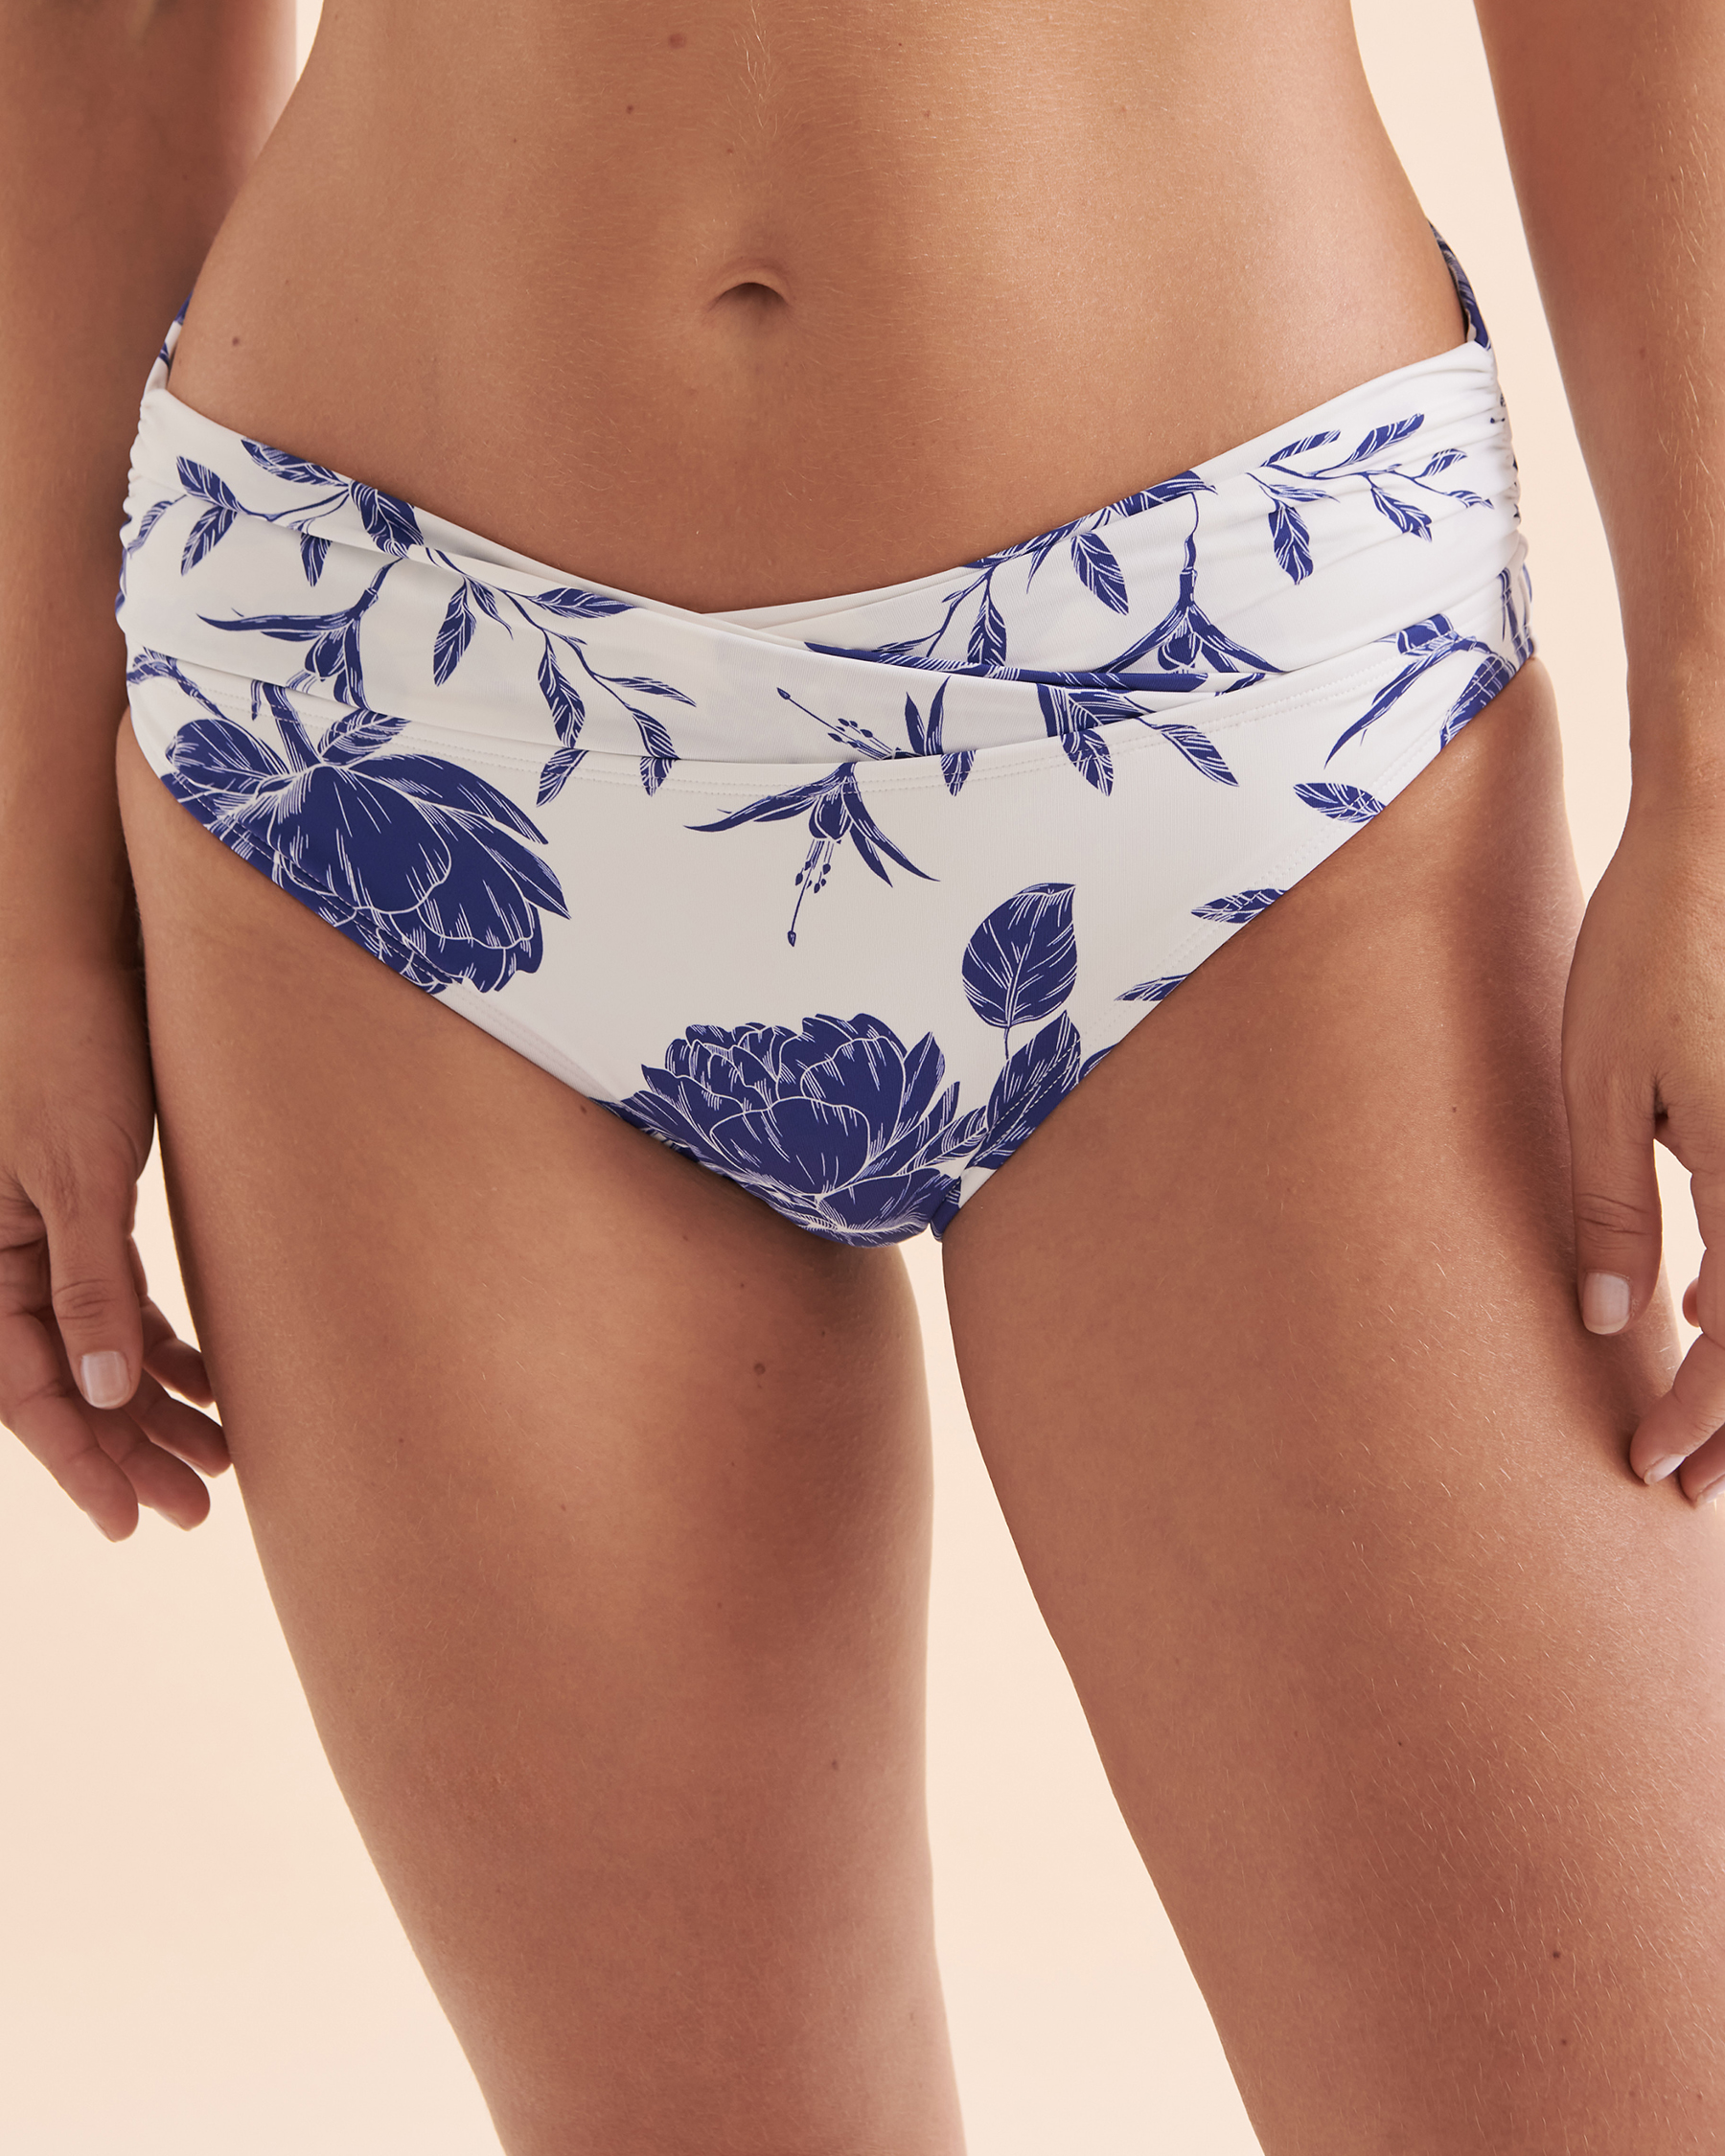 TURQUOISE COUTURE Floral Folded Waistband Bikini Bottom White & Blue Floral 01300271 - View2